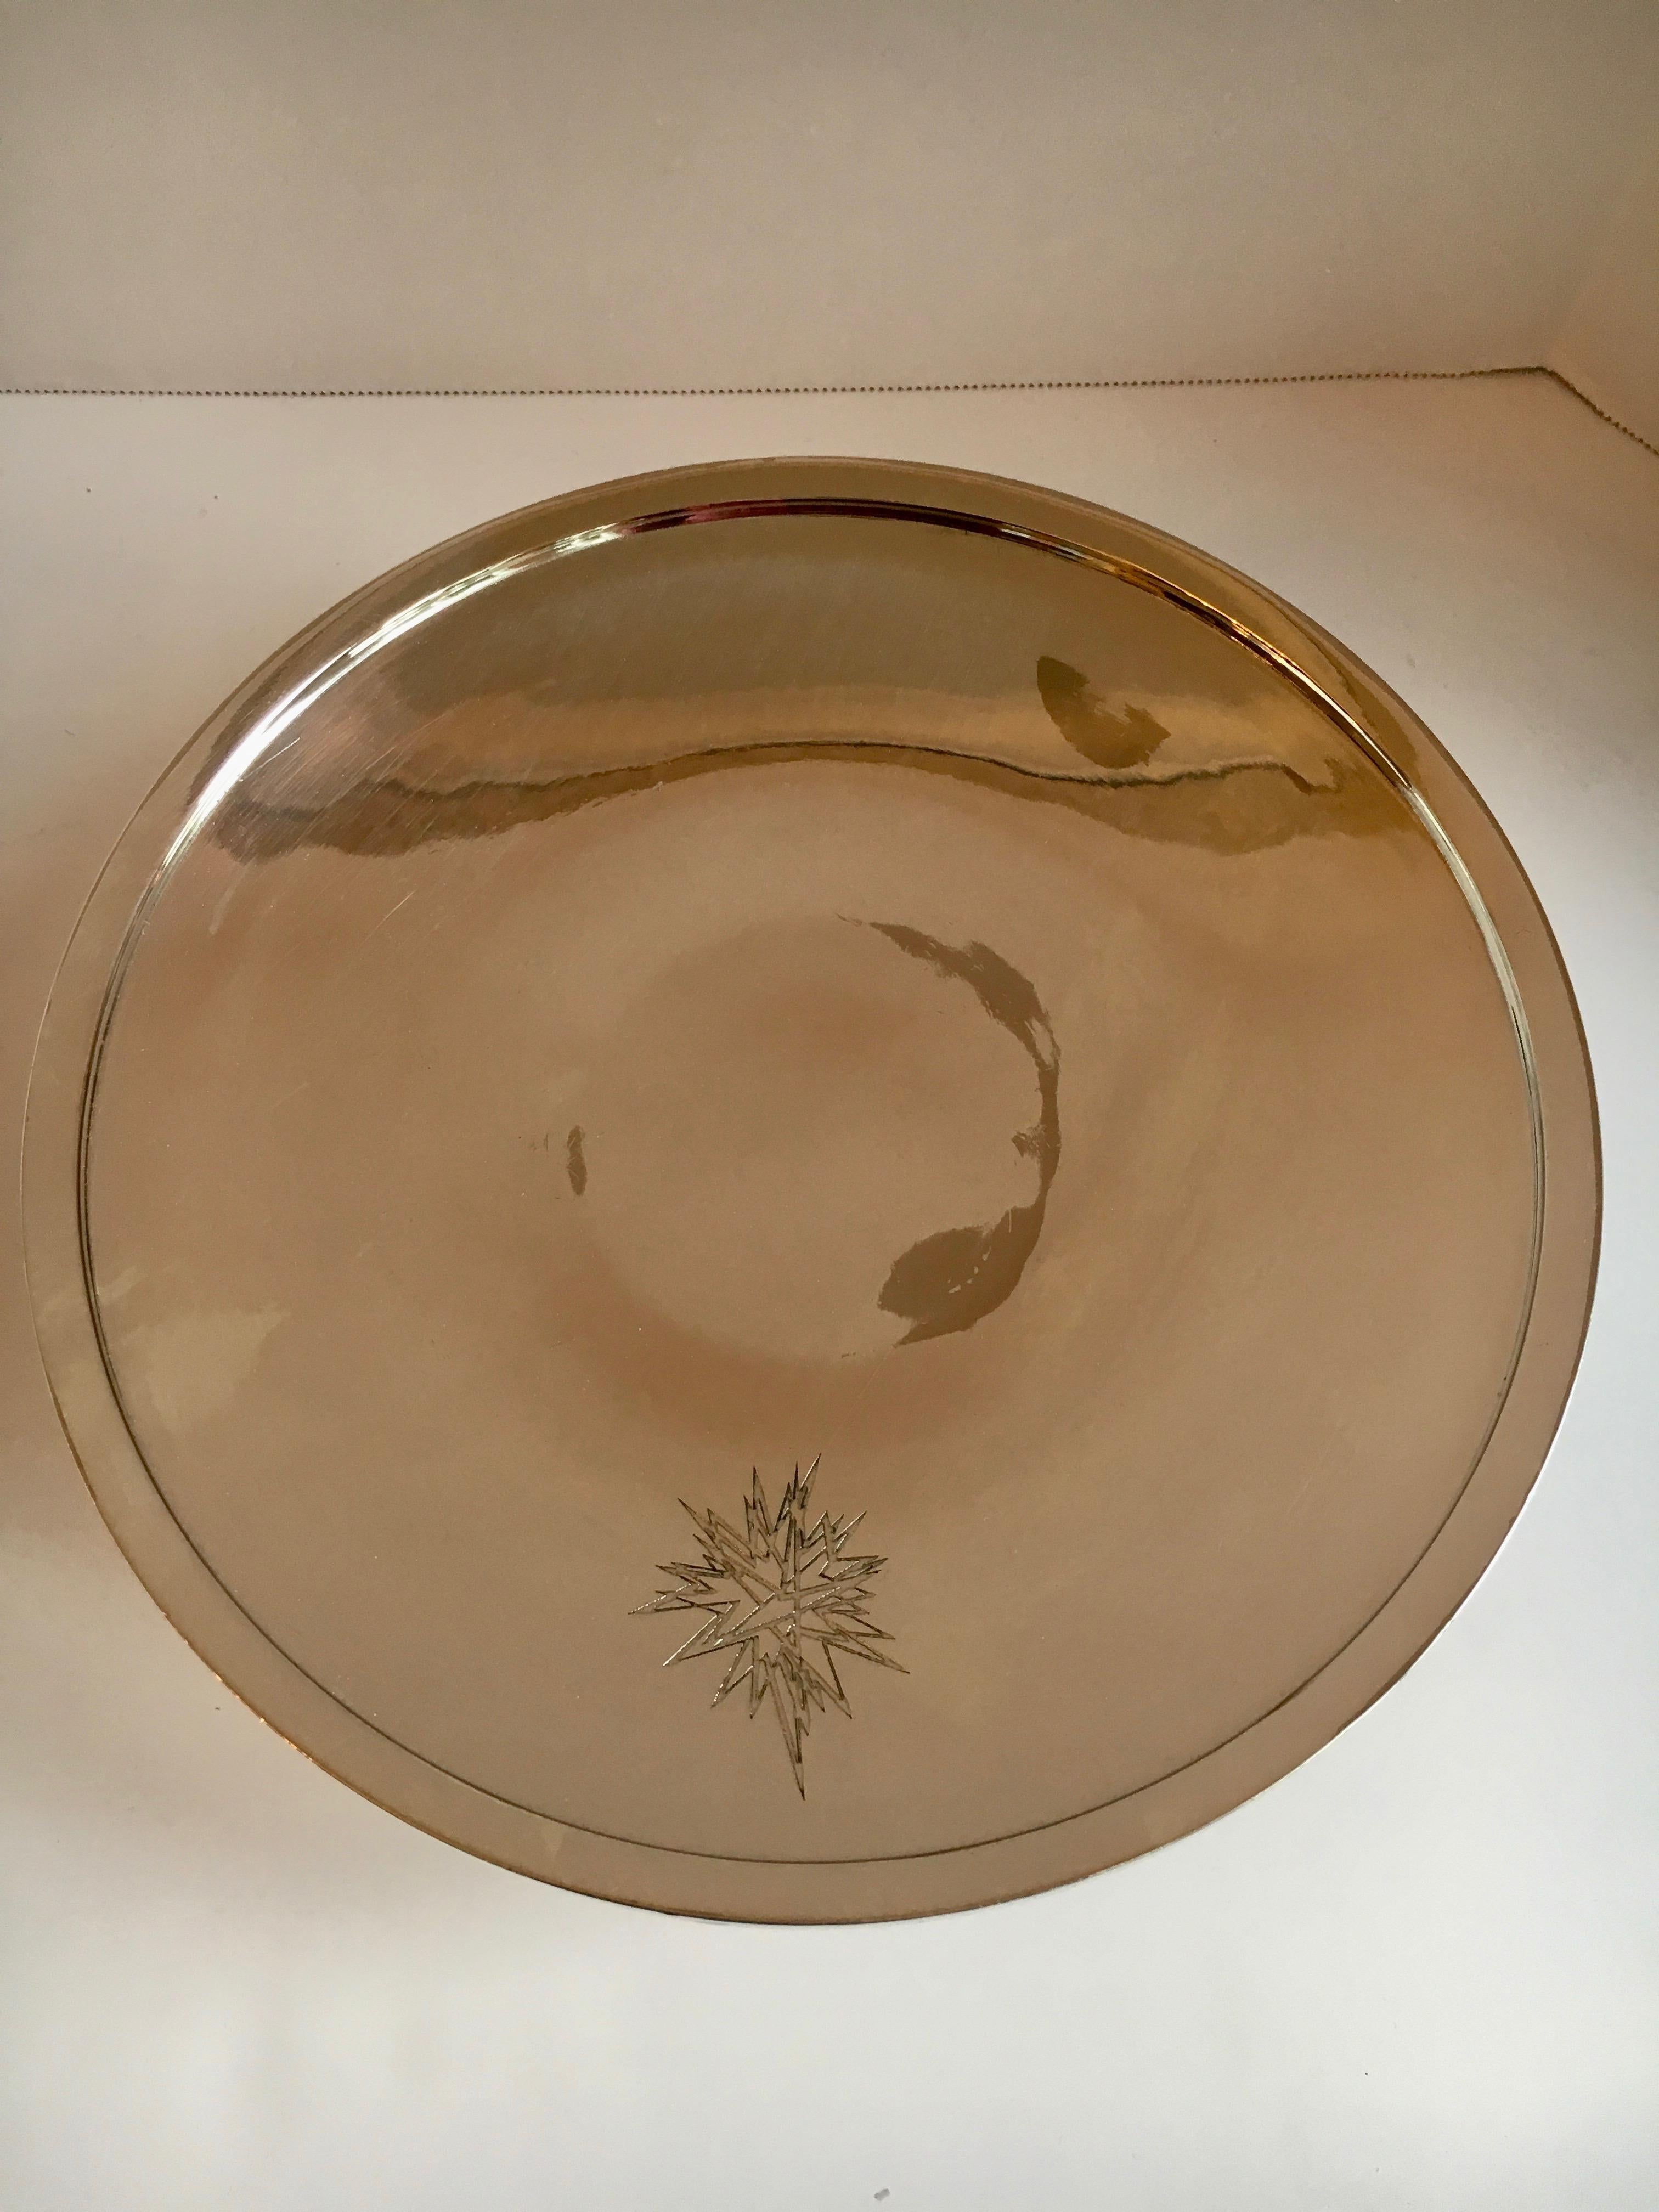 Beverly Hilton silver footed cake plate - a lovely and serving piece from the Historic Beverly Hilton Hotel. This silver plate cake plate has been highly polished. There are some imperfections on the platform where silver has been worn. Also atop